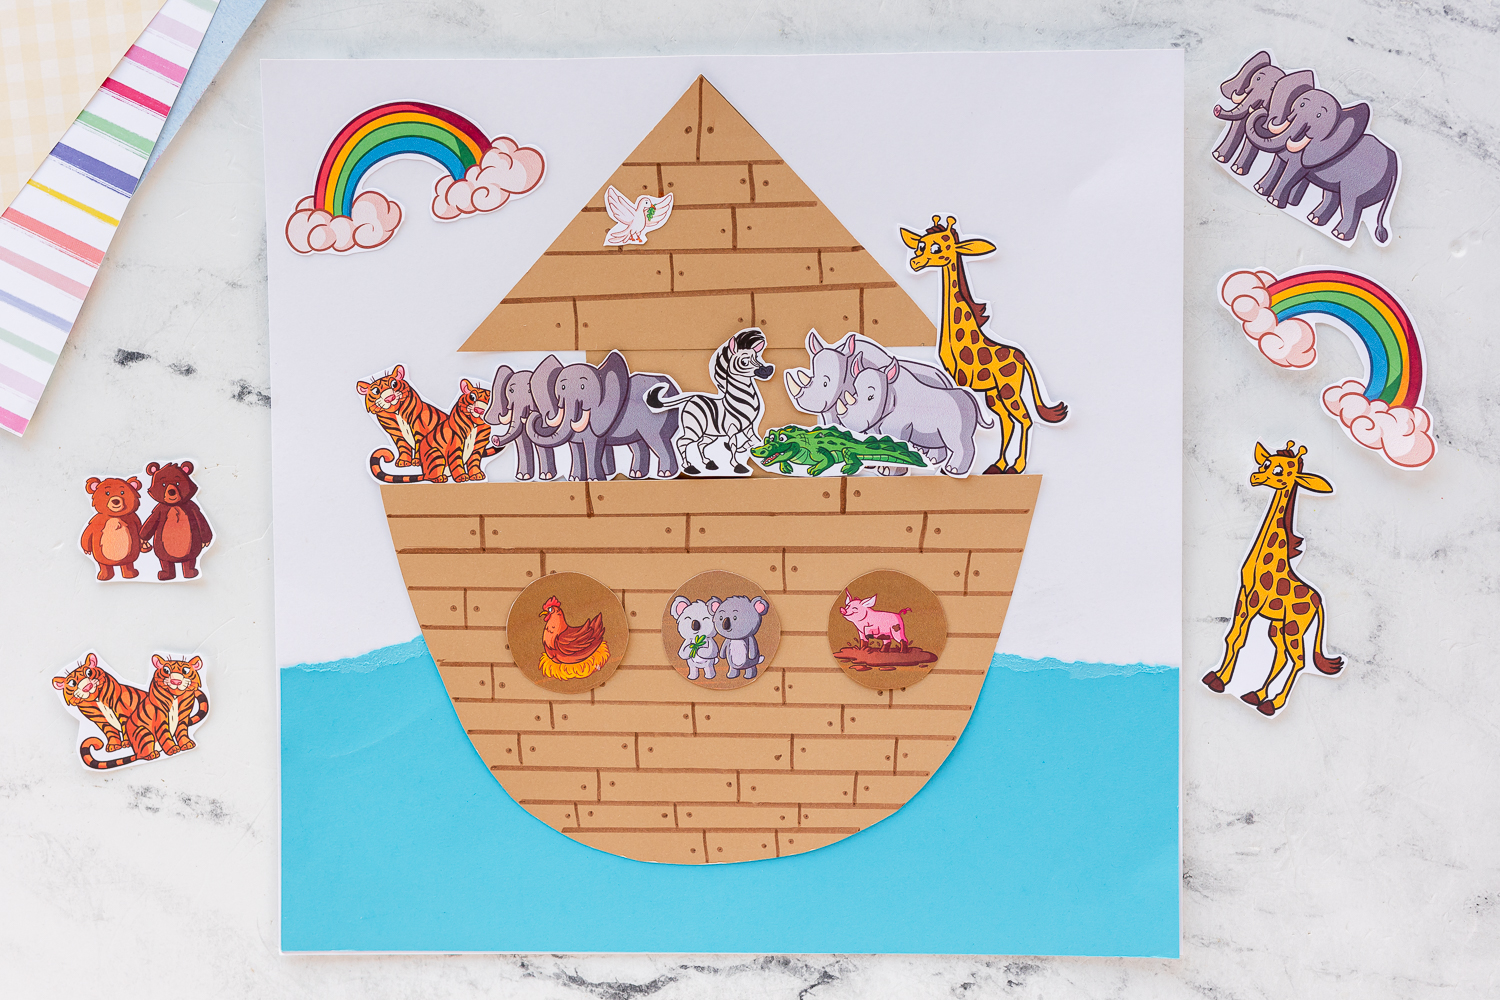 Noah's Ark colored version with cut out animals